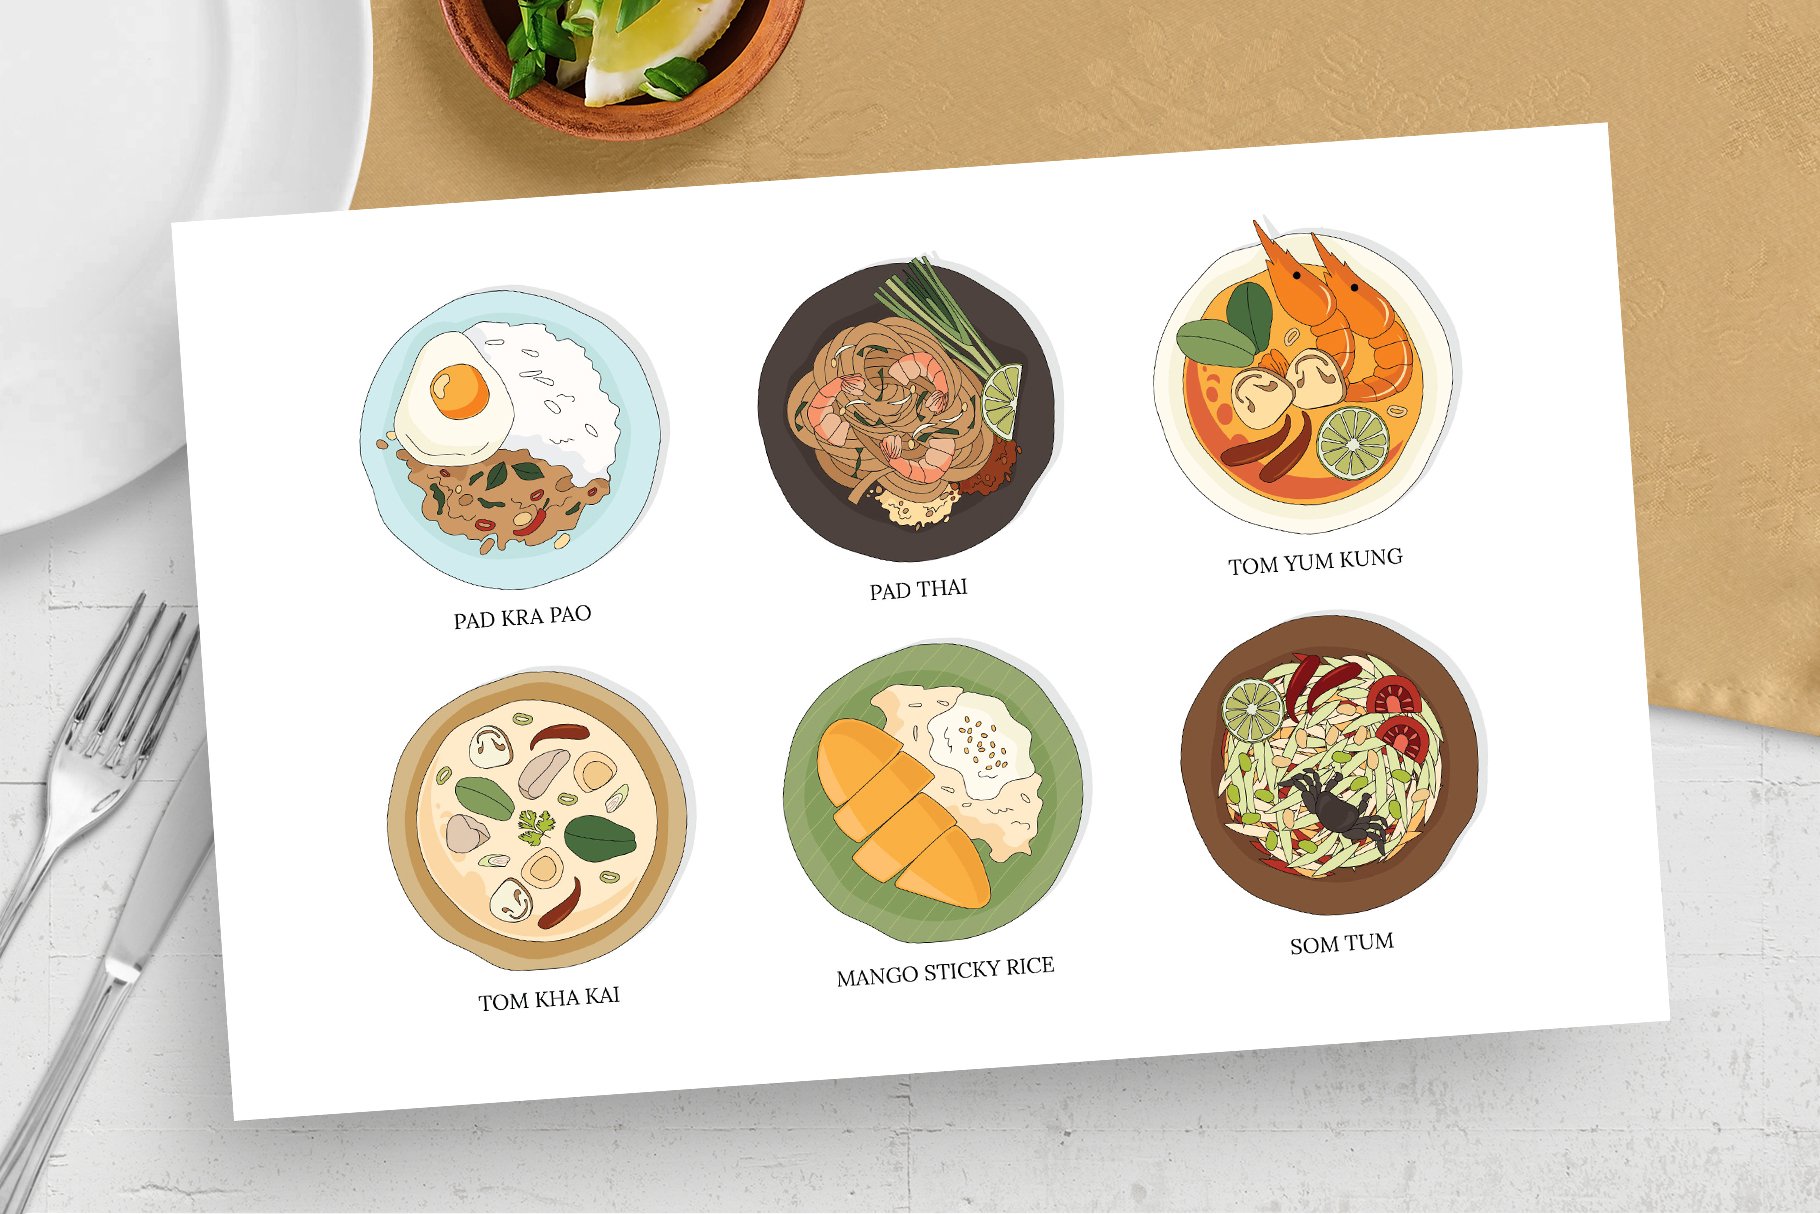 Diverse of classic Thai dishes on a white paper piece.